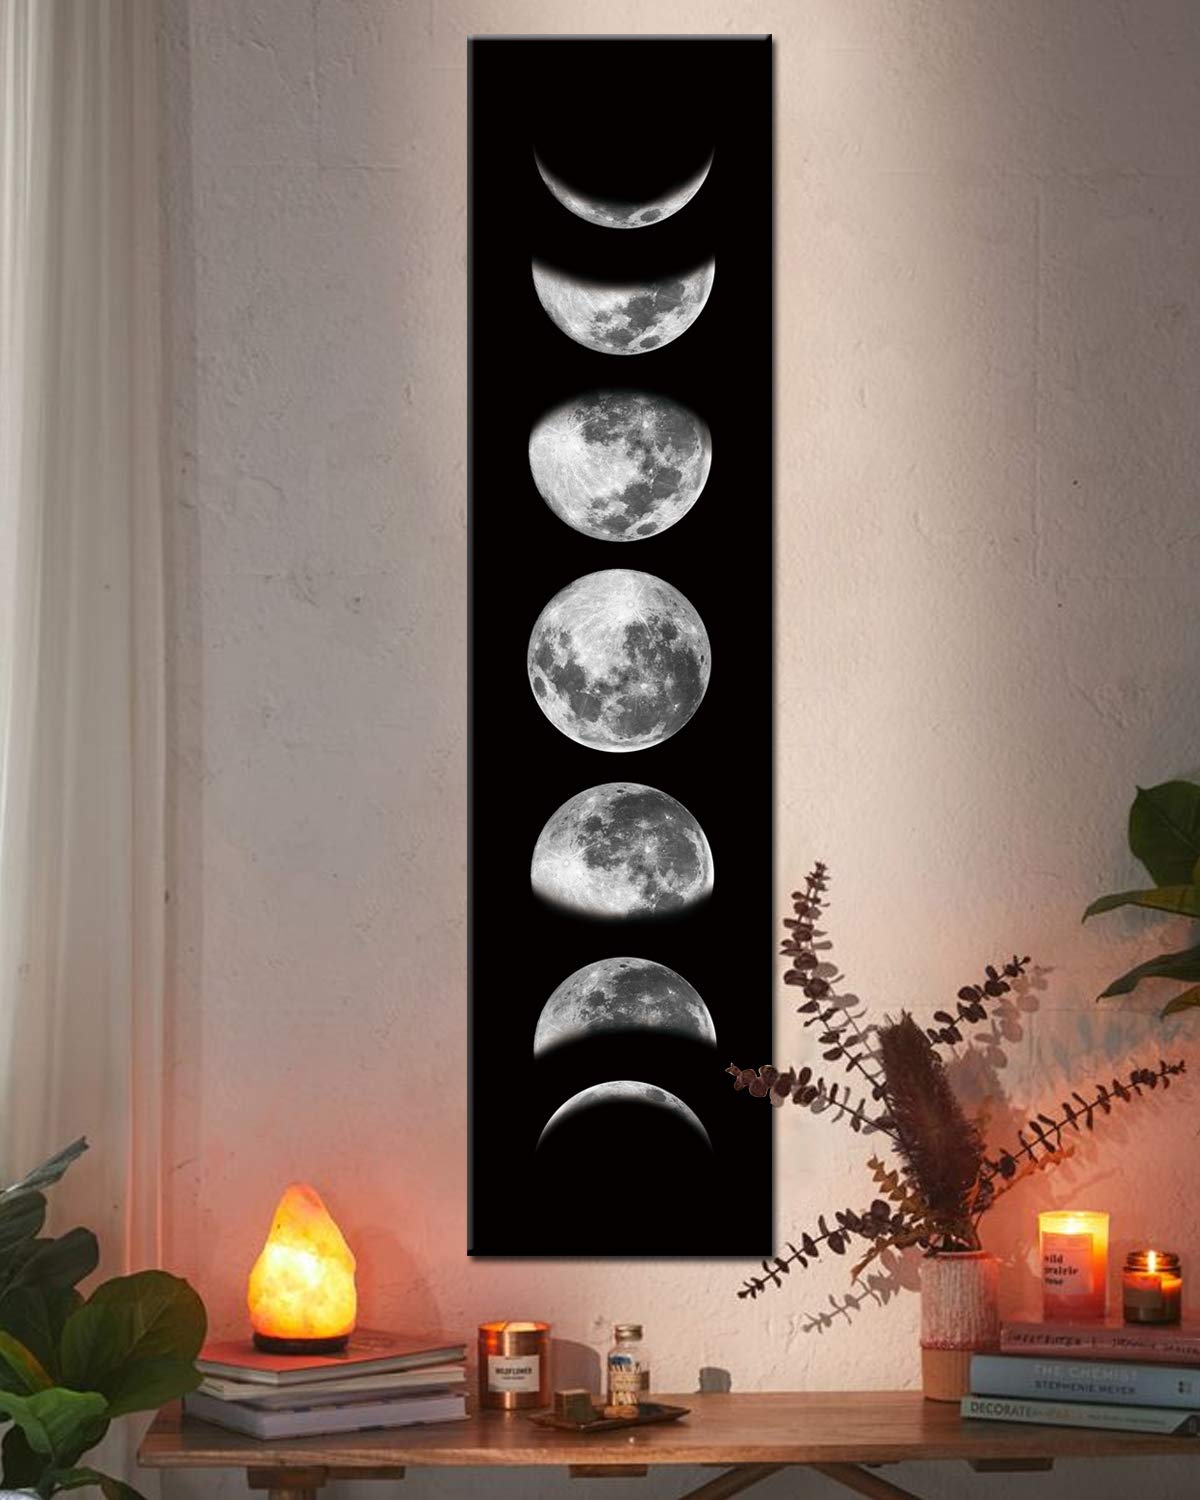 Zunniu Moon Phase Wall Art Painting, Black and White Moon Canvas Print Poster Wall Art Decoration for Bedroom Living Room (Black, S:12x47 noframed)